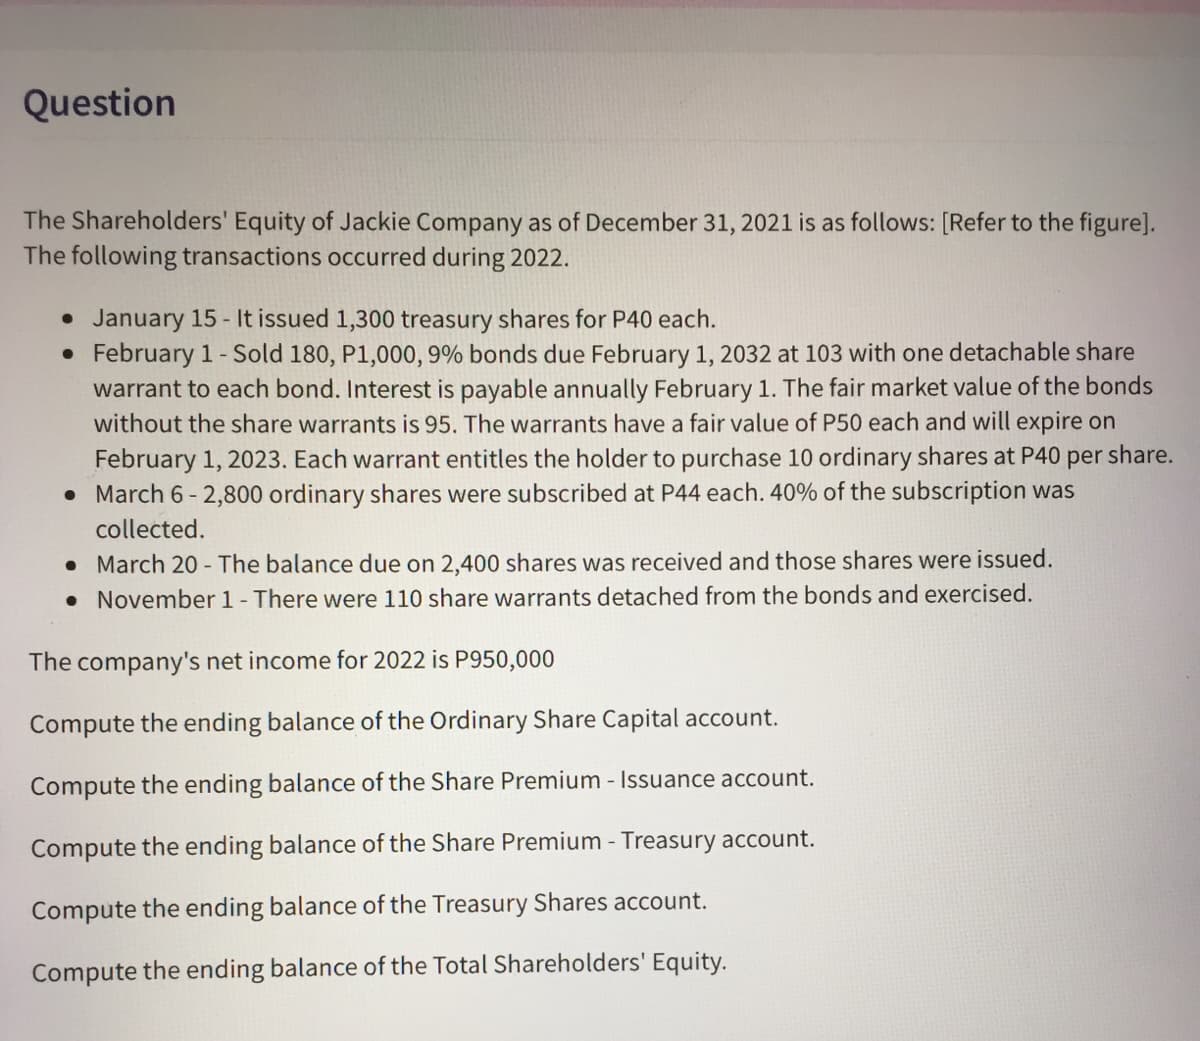 Question
The Shareholders' Equity of Jackie Company as of December 31, 2021 is as follows: [Refer to the figure].
The following transactions occurred during 2022.
• January 15 - It issued 1,300 treasury shares for P40 each.
• February 1- Sold 180, P1,000, 9% bonds due February 1, 2032 at 103 with one detachable share
warrant to each bond. Interest is payable annually February 1. The fair market value of the bonds
without the share warrants is 95. The warrants have a fair value of P50 each and will expire on
February 1, 2023. Each warrant entitles the holder to purchase 10 ordinary shares at P40 per share.
• March 6- 2,800 ordinary shares were subscribed at P44 each. 40% of the subscription was
collected.
• March 20 - The balance due on 2,400 shares was received and those shares were issued.
• November 1- There were 110 share warrants detached from the bonds and exercised.
The company's net income for 2022 is P950,000
Compute the ending balance of the Ordinary Share Capital account.
Compute the ending balance of the Share Premium - Issuance account.
Compute the ending balance of the Share Premium - Treasury account.
Compute the ending balance of the Treasury Shares account.
Compute the ending balance of the Total Shareholders' Equity.
